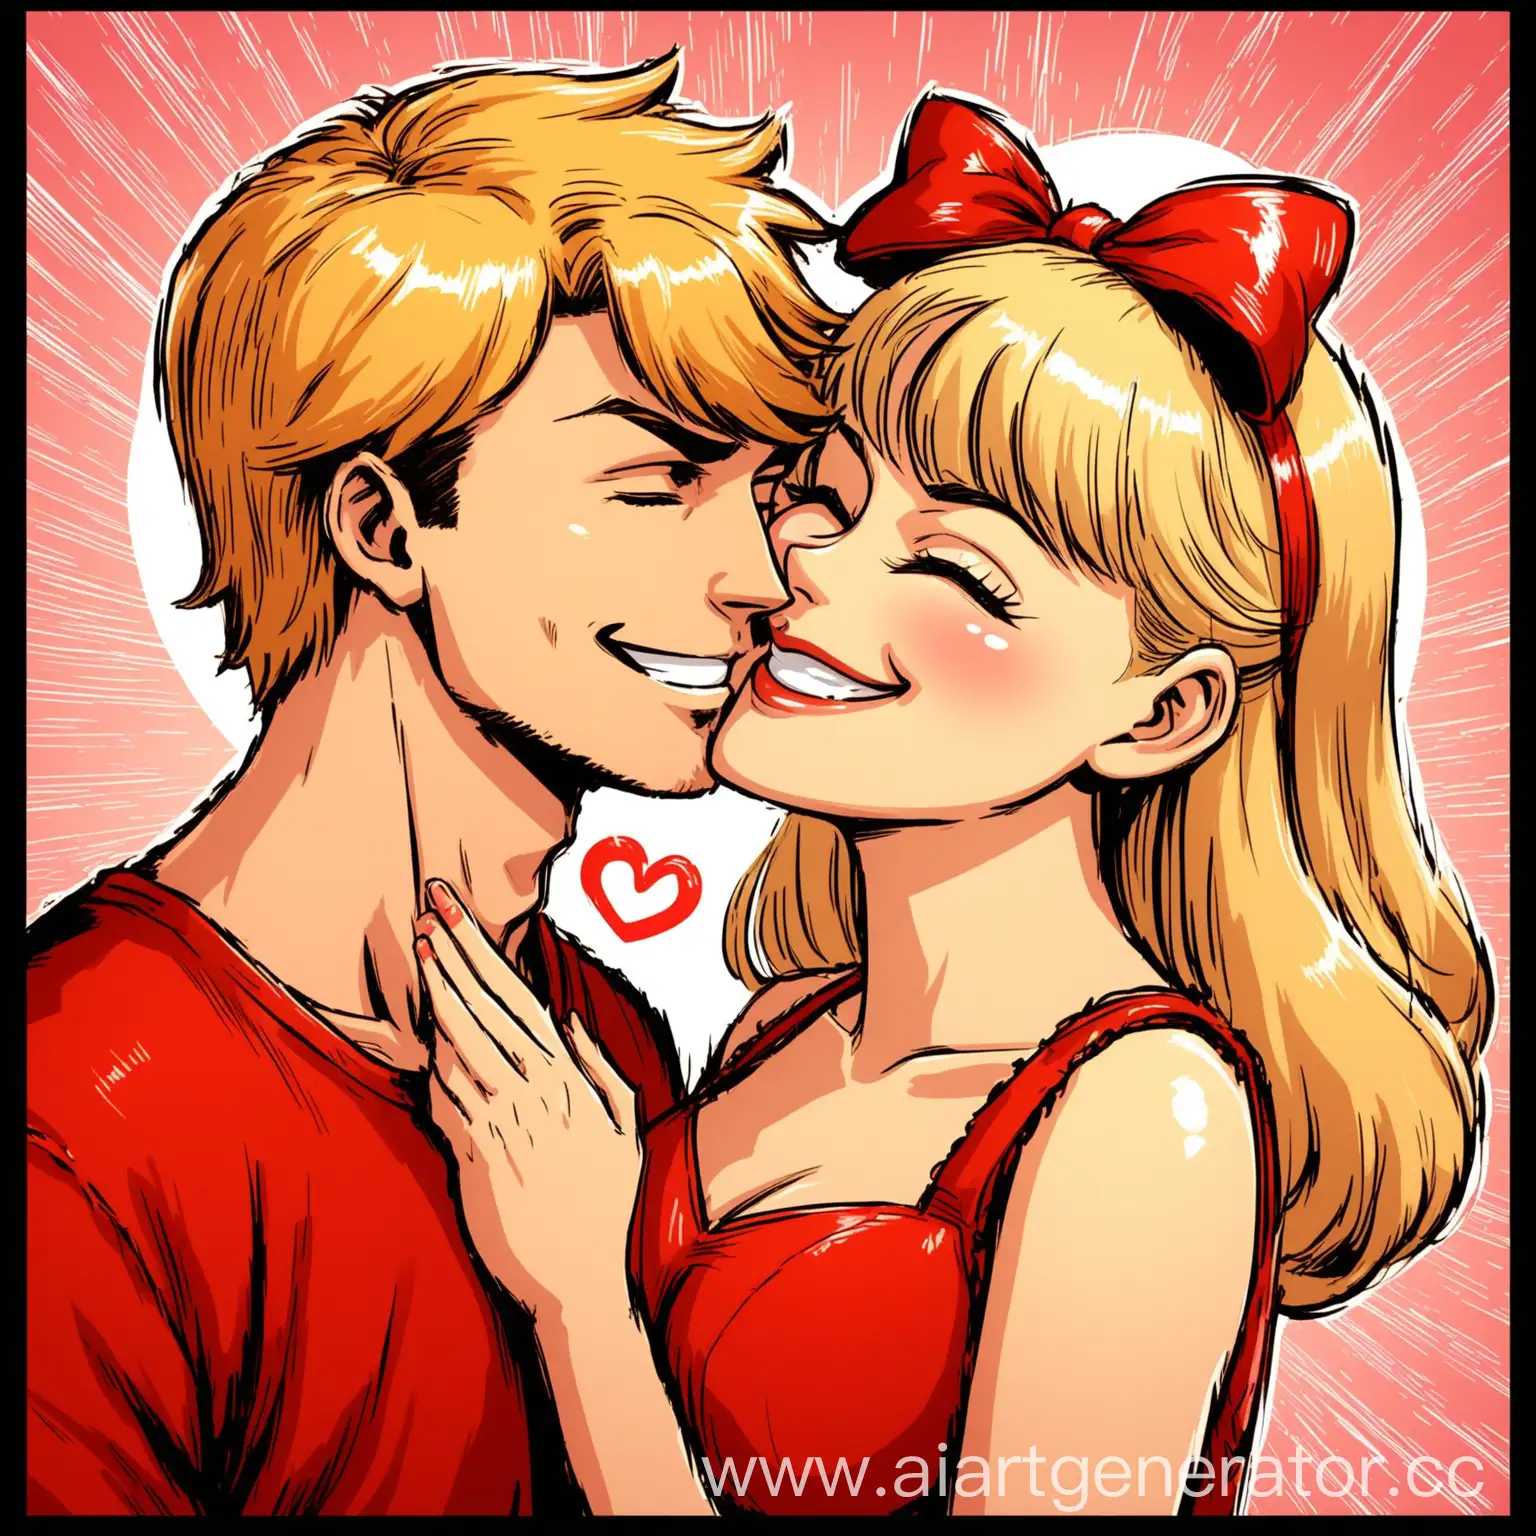 Adorable-Girl-in-Red-Sundress-Blows-Heart-Kiss-to-ComicStyle-Blonde-Boy